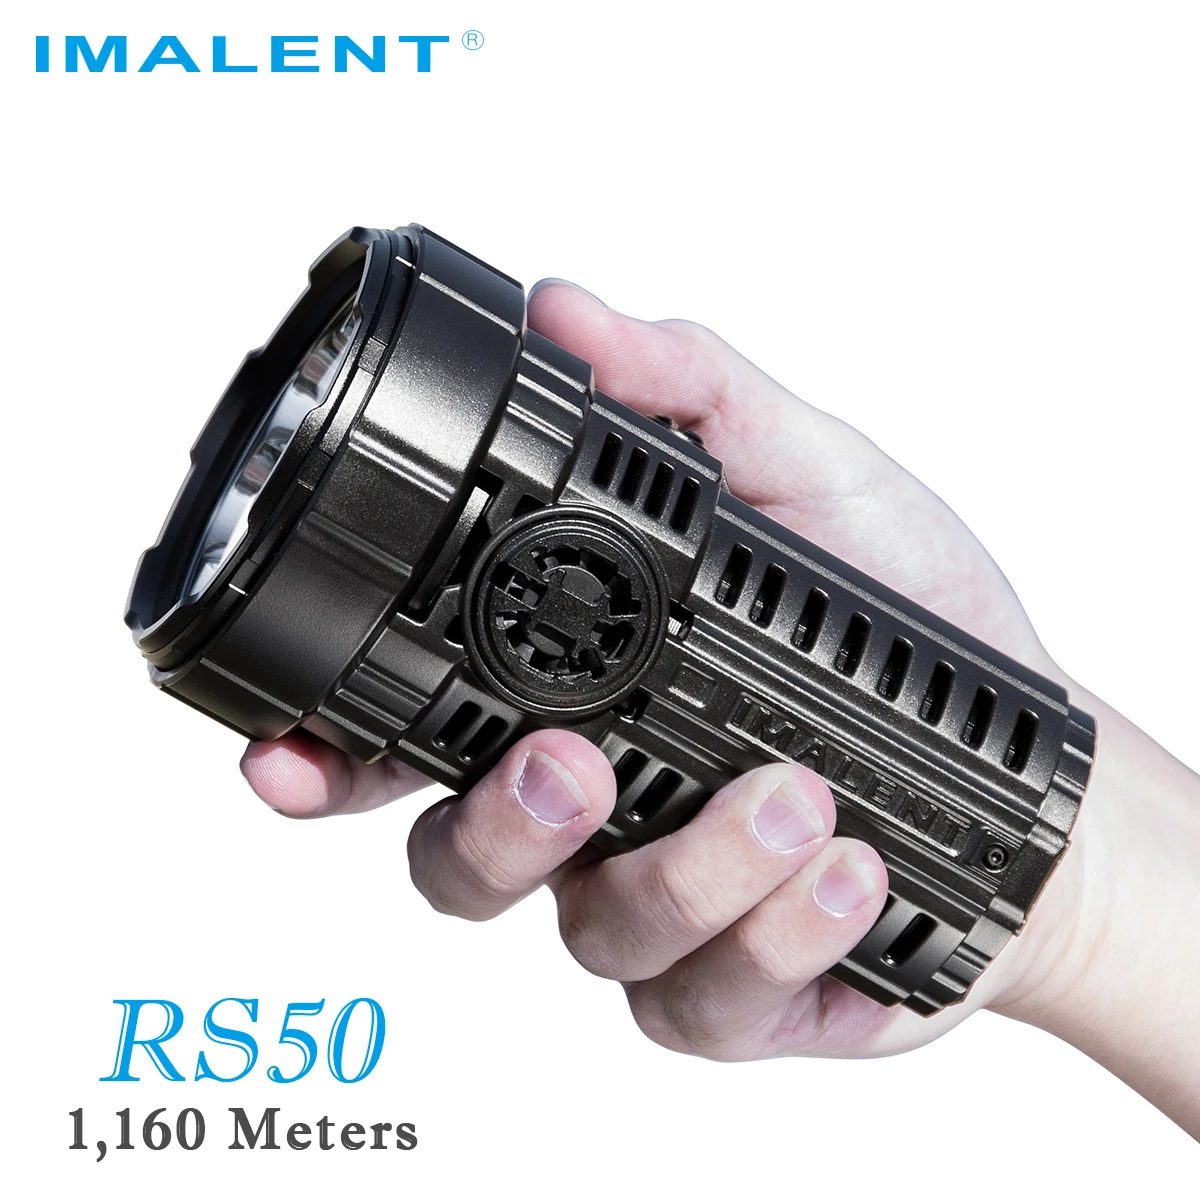 IMALENT RS50 EDC Powerful Flashlight 20000 Lumens CREE XHP50.3 HI LED Rechargeable Ultra-Bright Torch for Outdoor camping Hiking